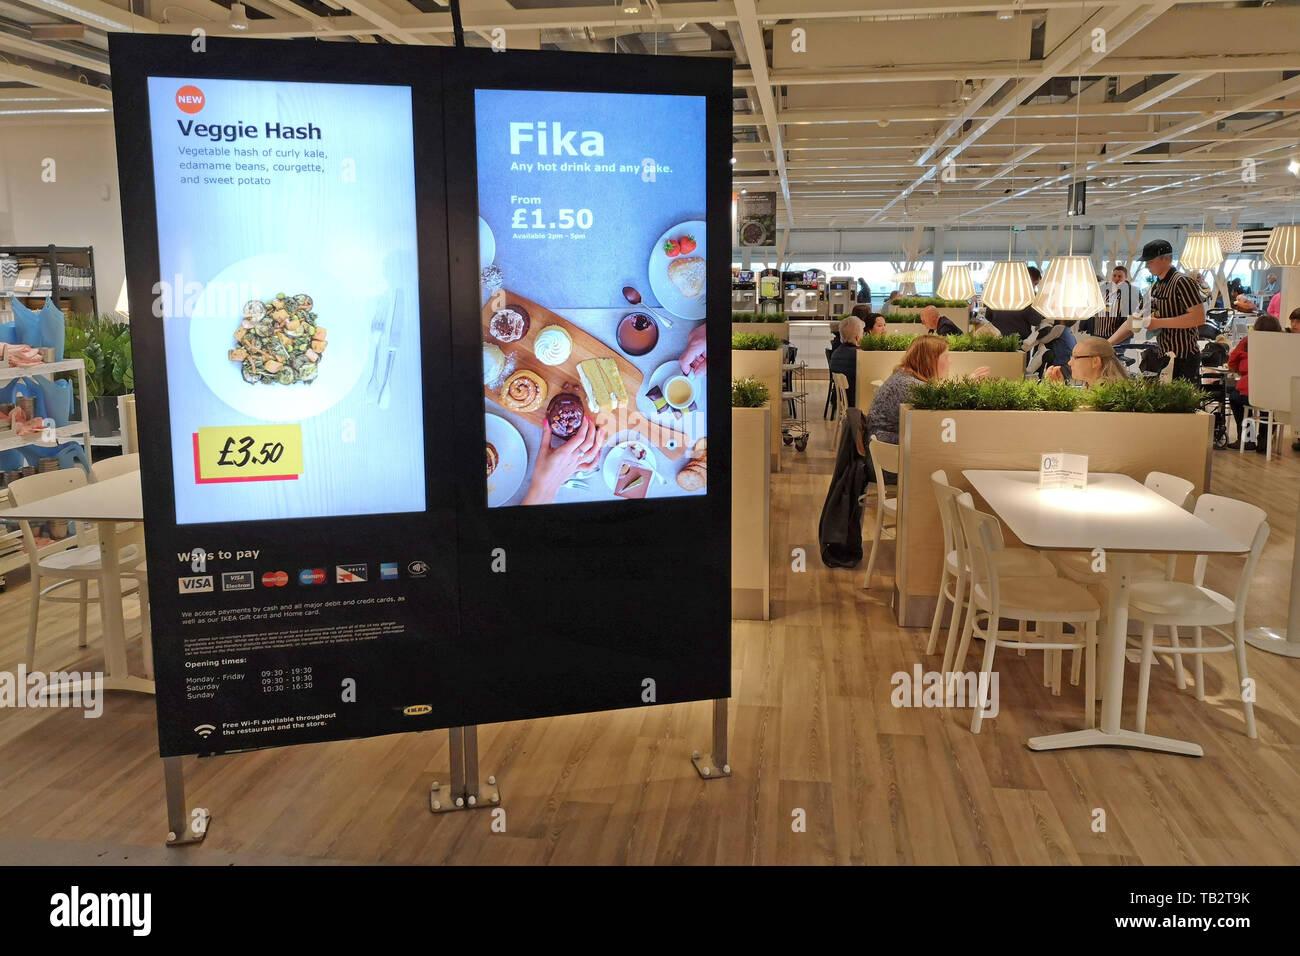 Restaurant at Ikea in Coventry, UK, on May 29, 2019. Stock Photo